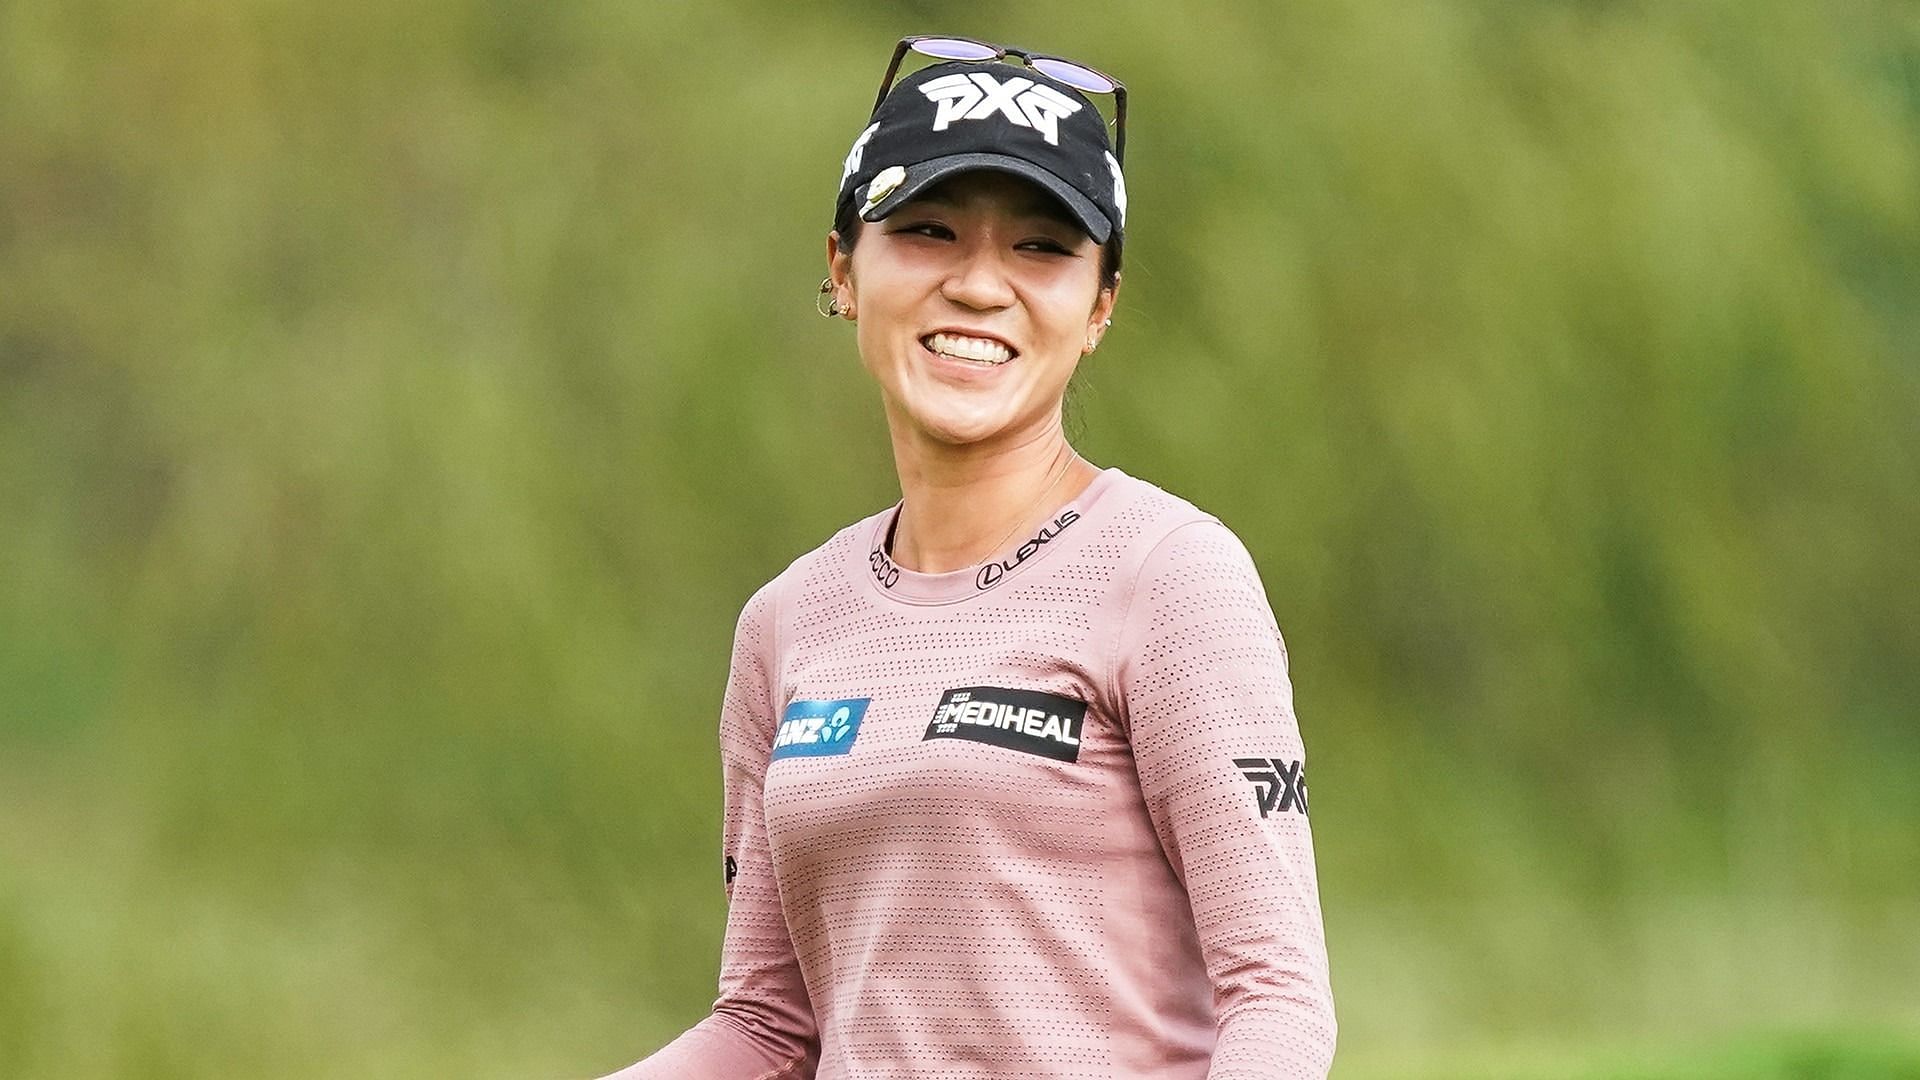 Lydia Ko will make a return to the tour after the break